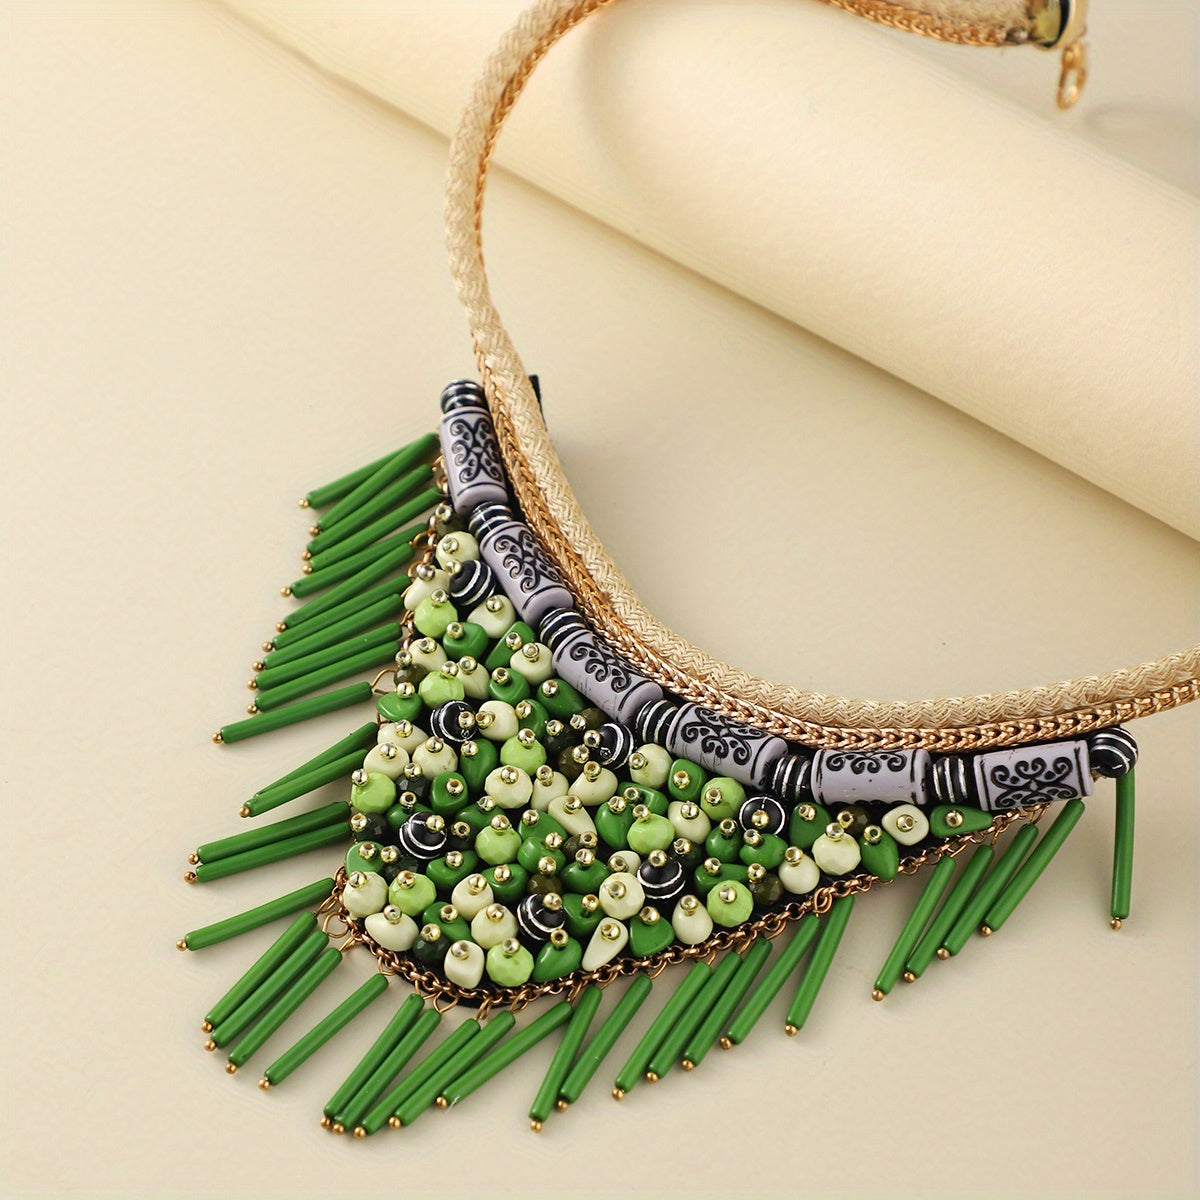 Geometric Acrylic Decoration Multilayer Long Necklace Exaggerated Neck Jewelry Gift For Women Girls